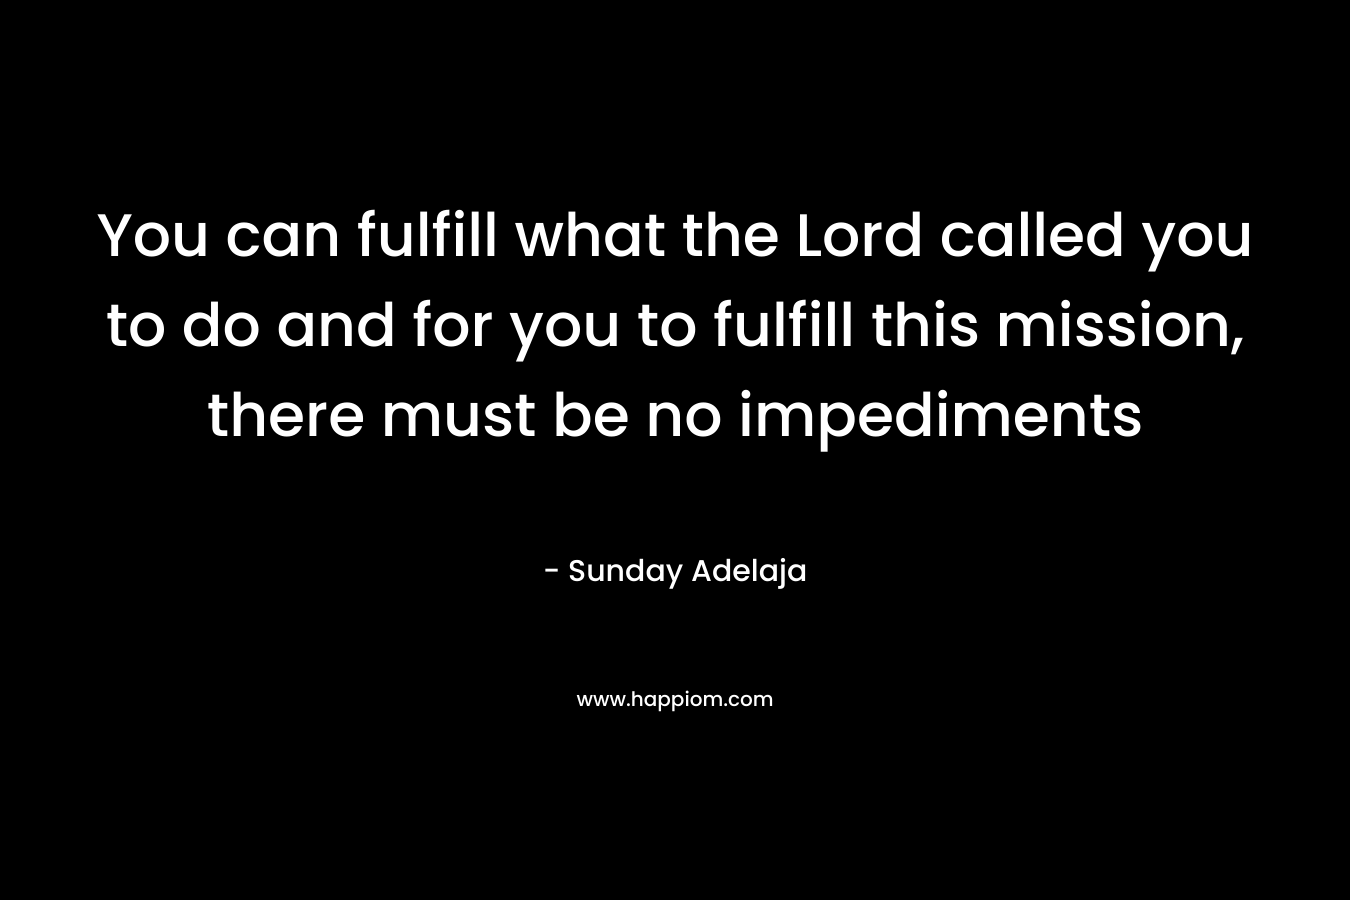 You can fulfill what the Lord called you to do and for you to fulfill this mission, there must be no impediments